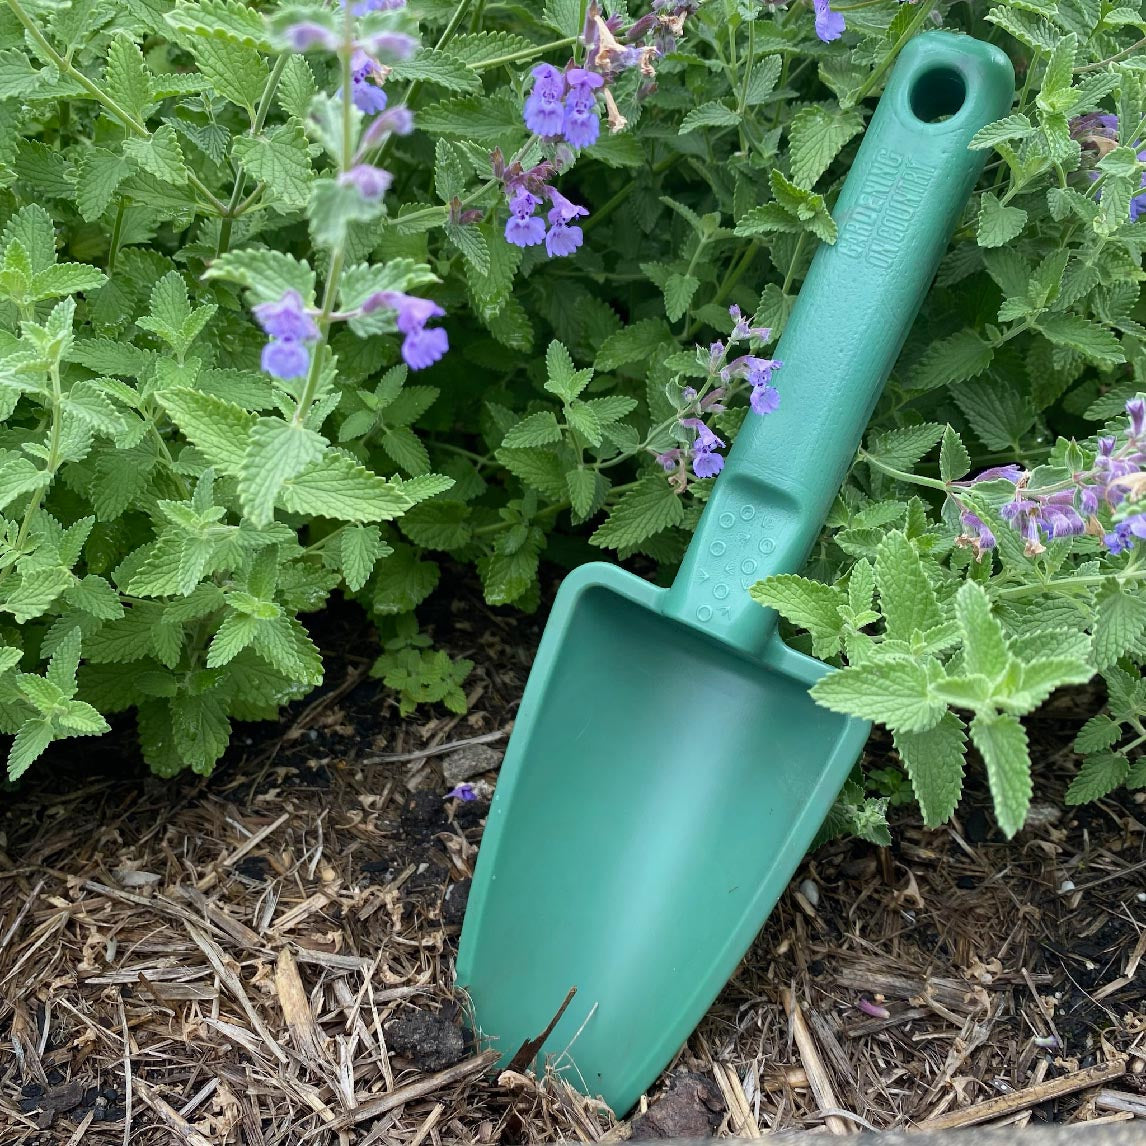 GARDENING ON COUNTRY - TROWEL